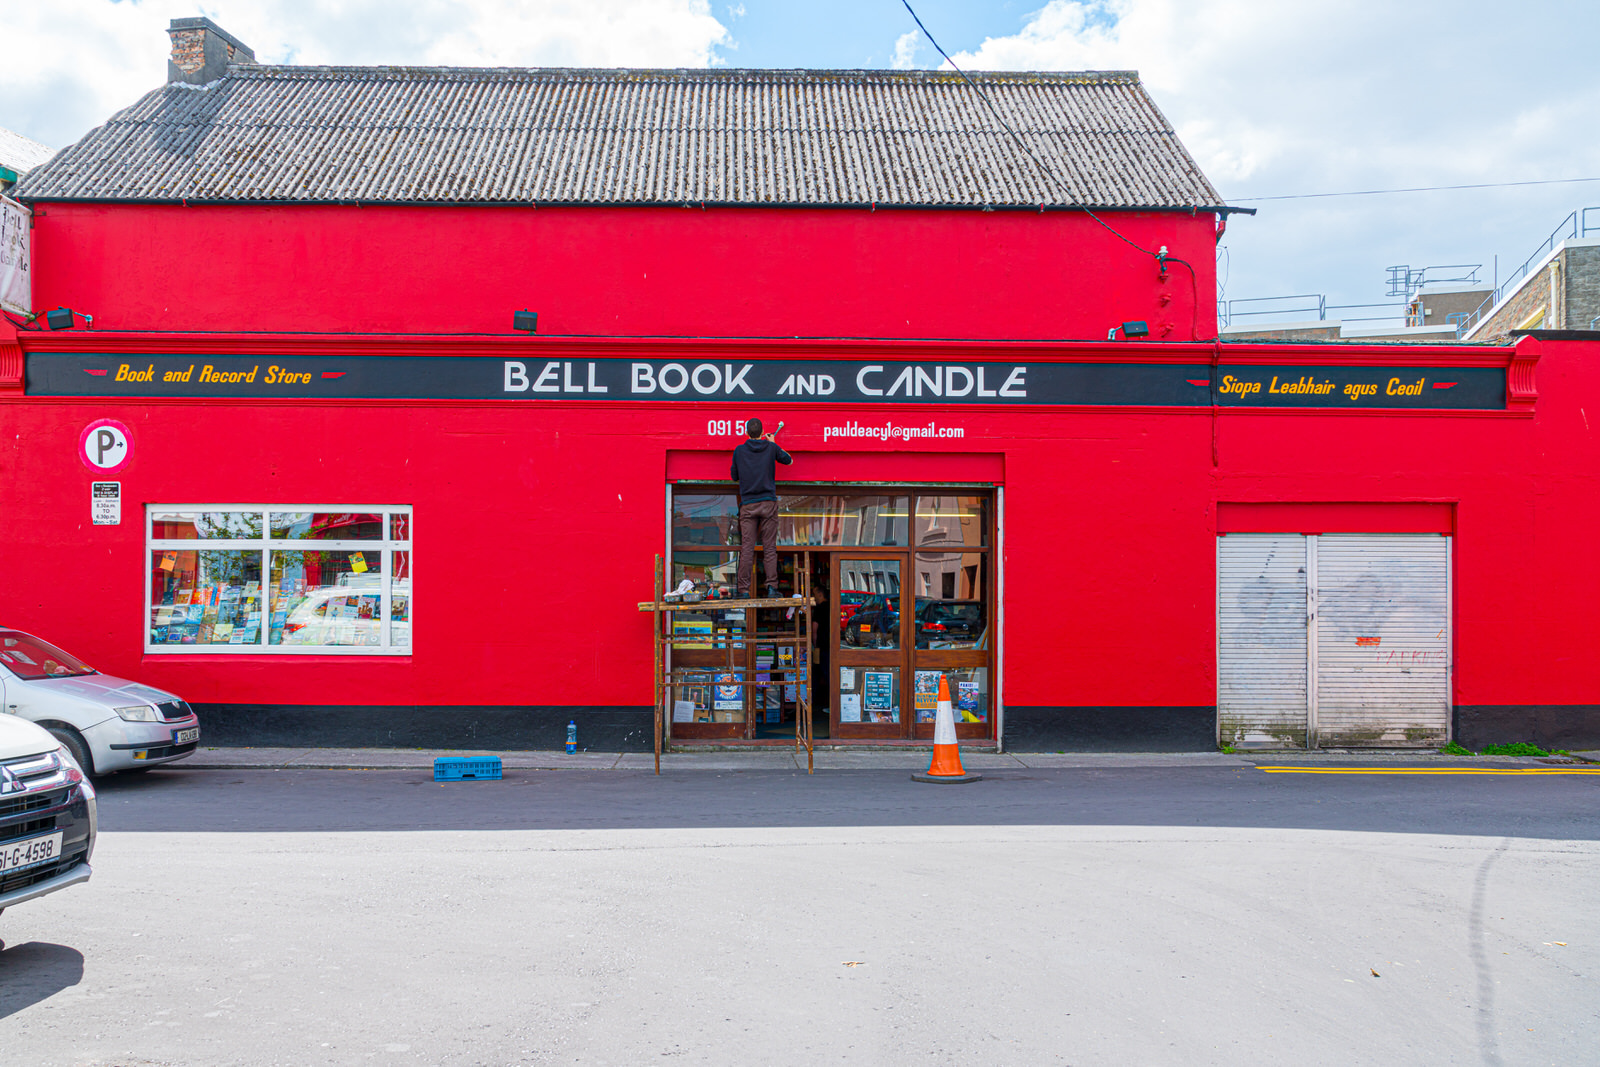 BELL BOOK AND CANDLE [BOOK AND RECORD STORE] 161207 1